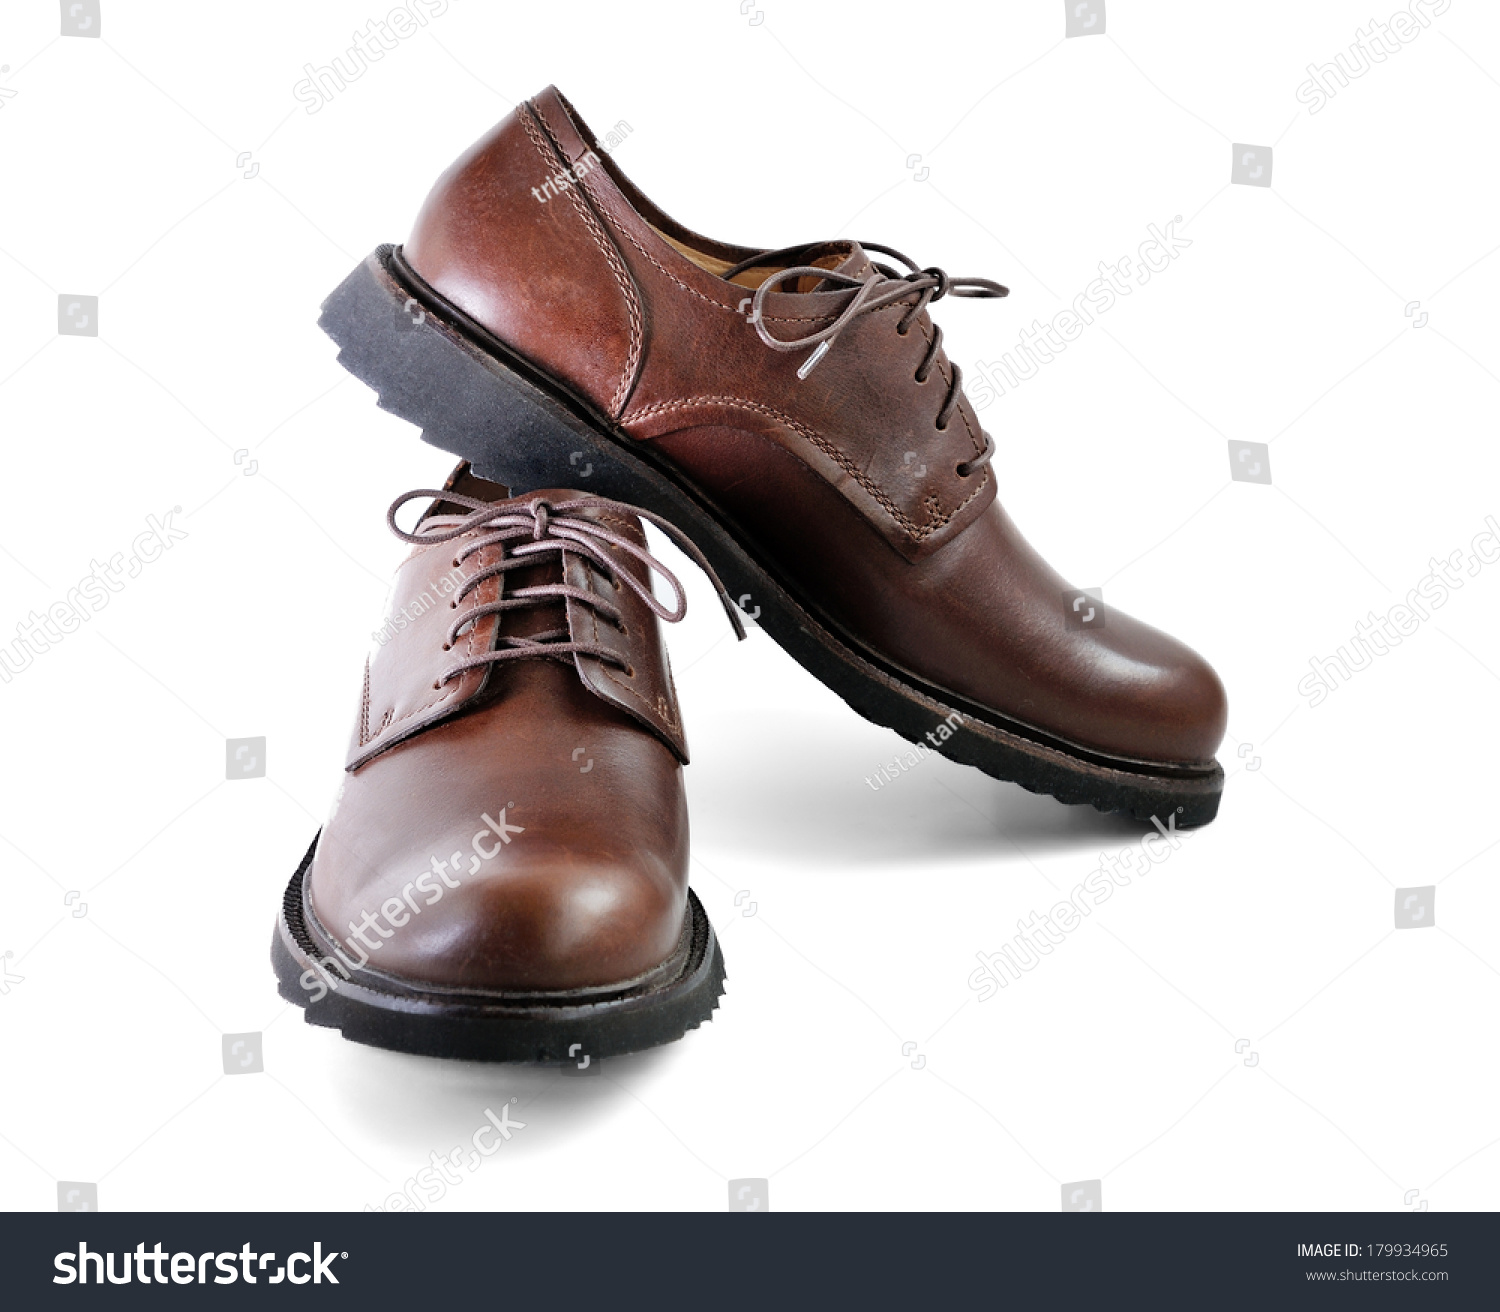 Brown Leather Man Shoes Isolated On Stock Photo 179934965 - Shutterstock